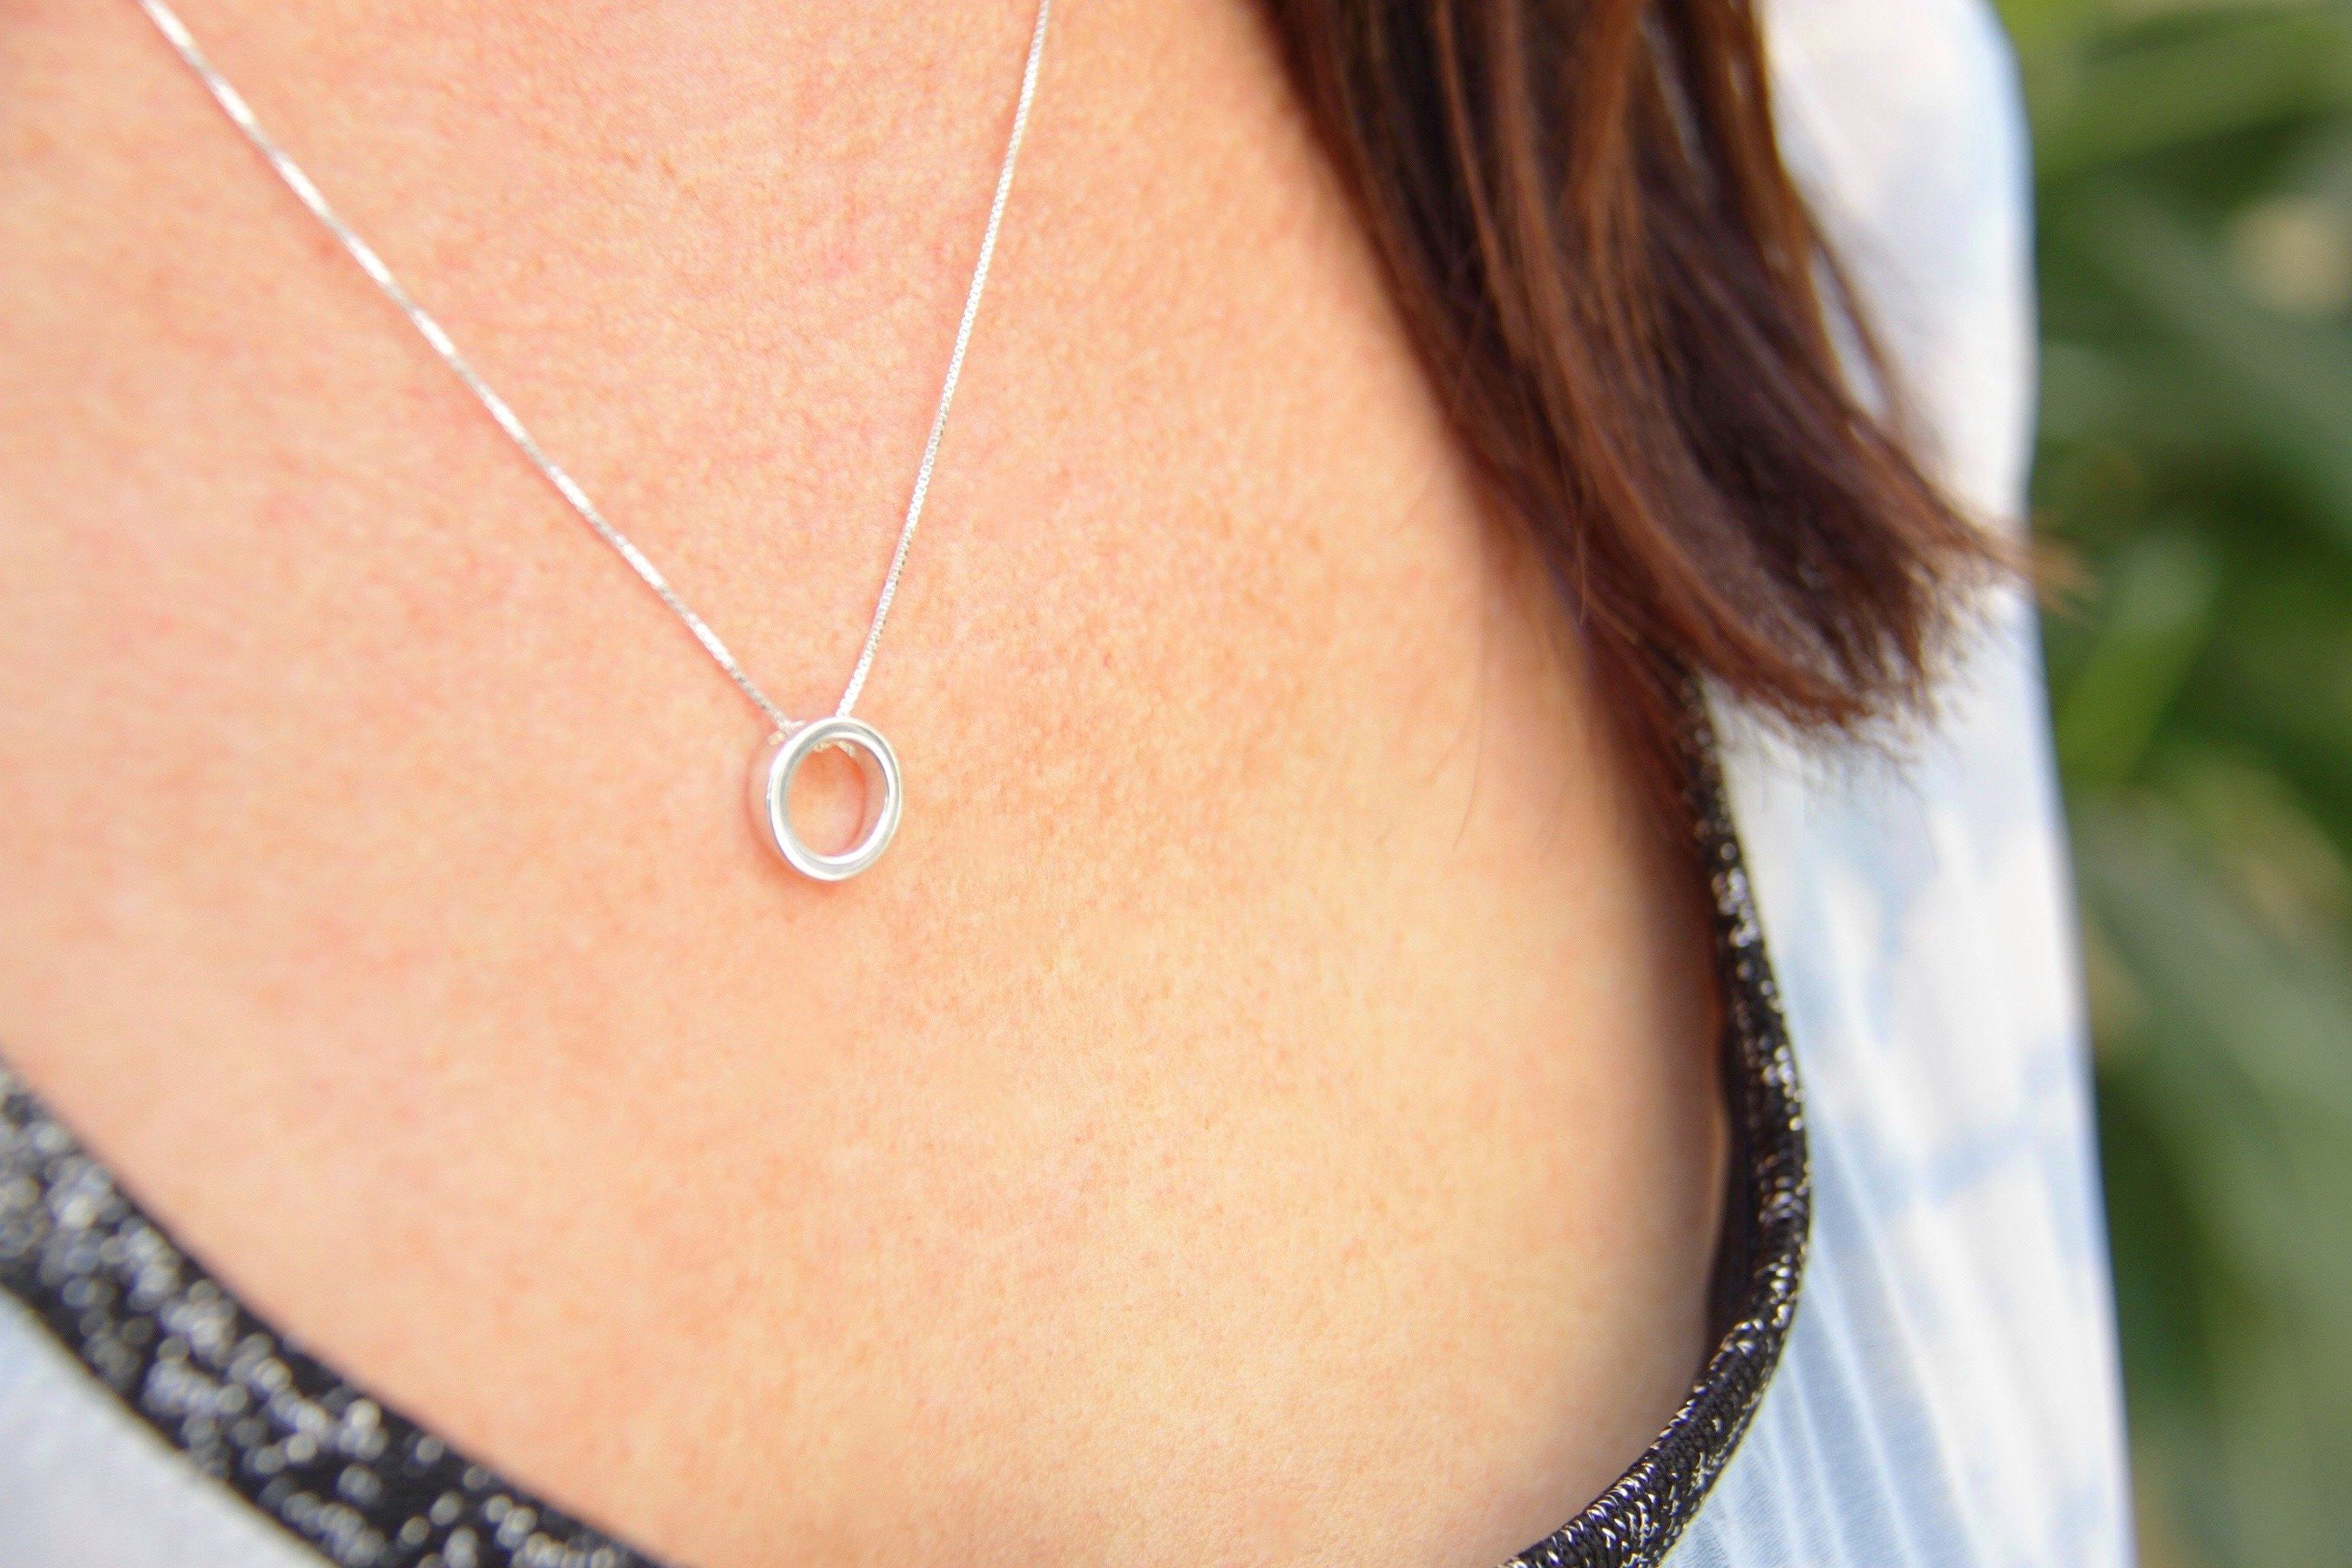 Circle Pendant Necklace in 925 Silver - Kardia